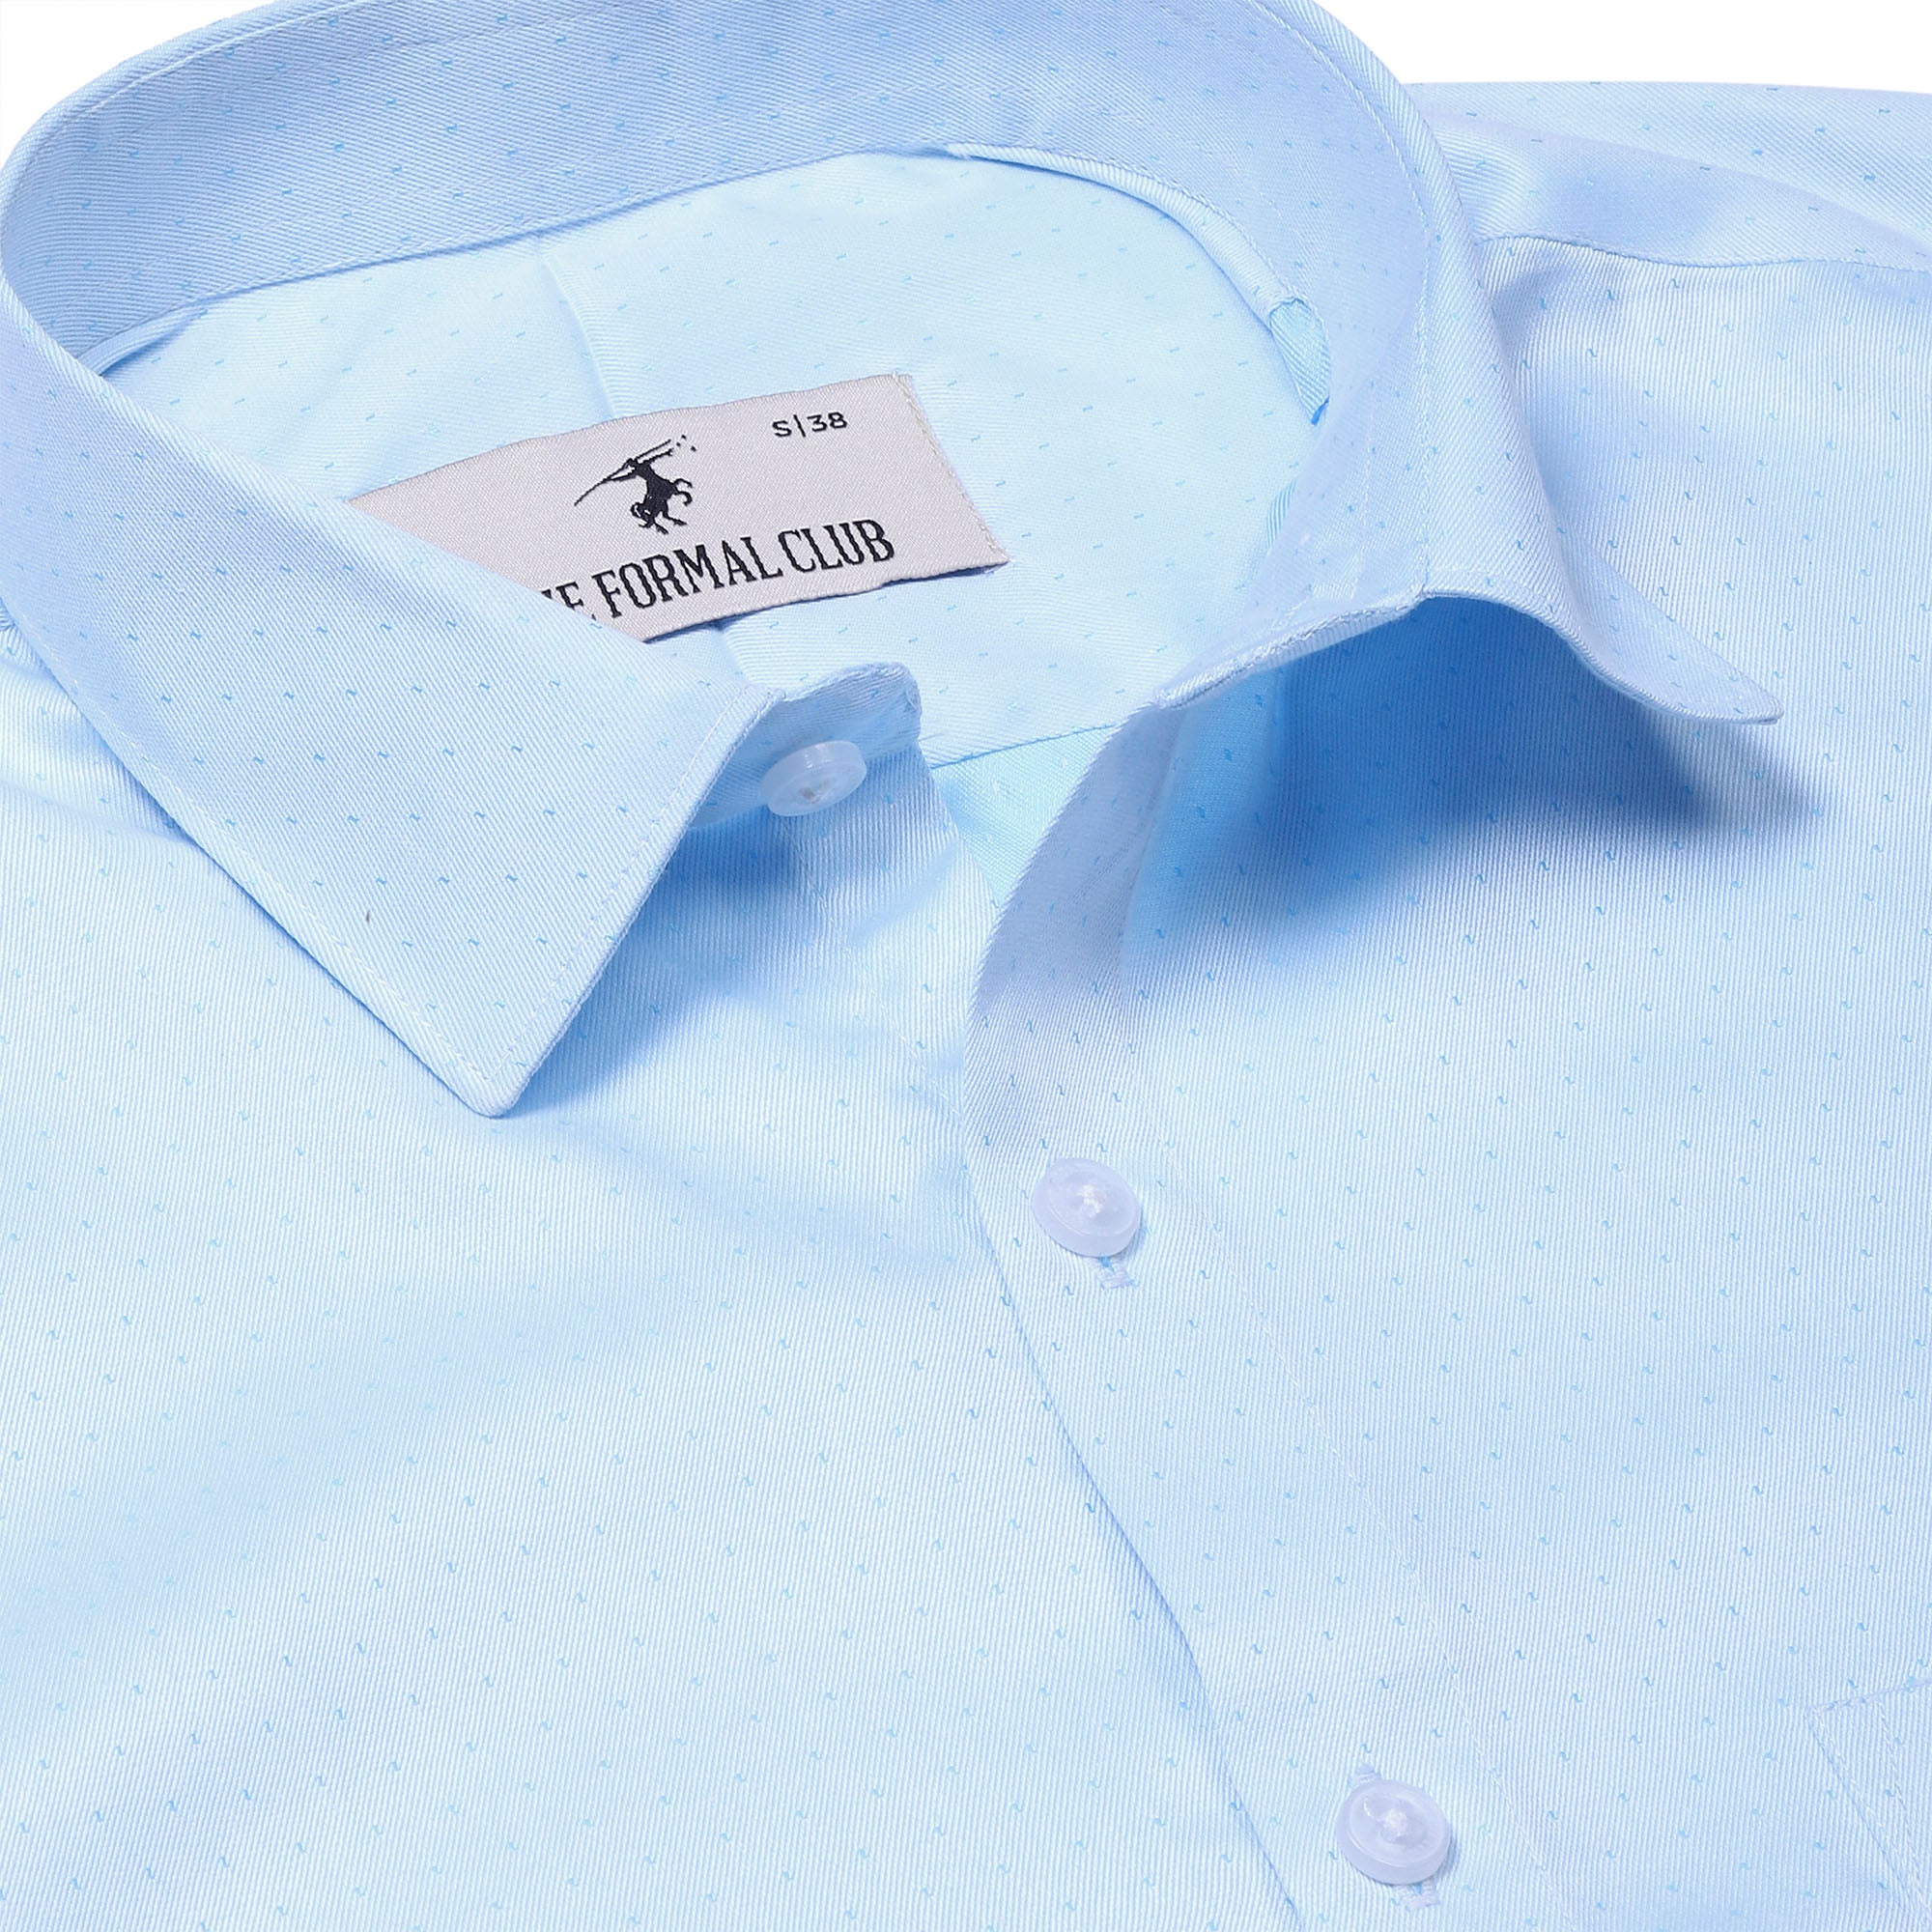 Donald Dobby Textured Shirt in Sky Blue - The Formal Club